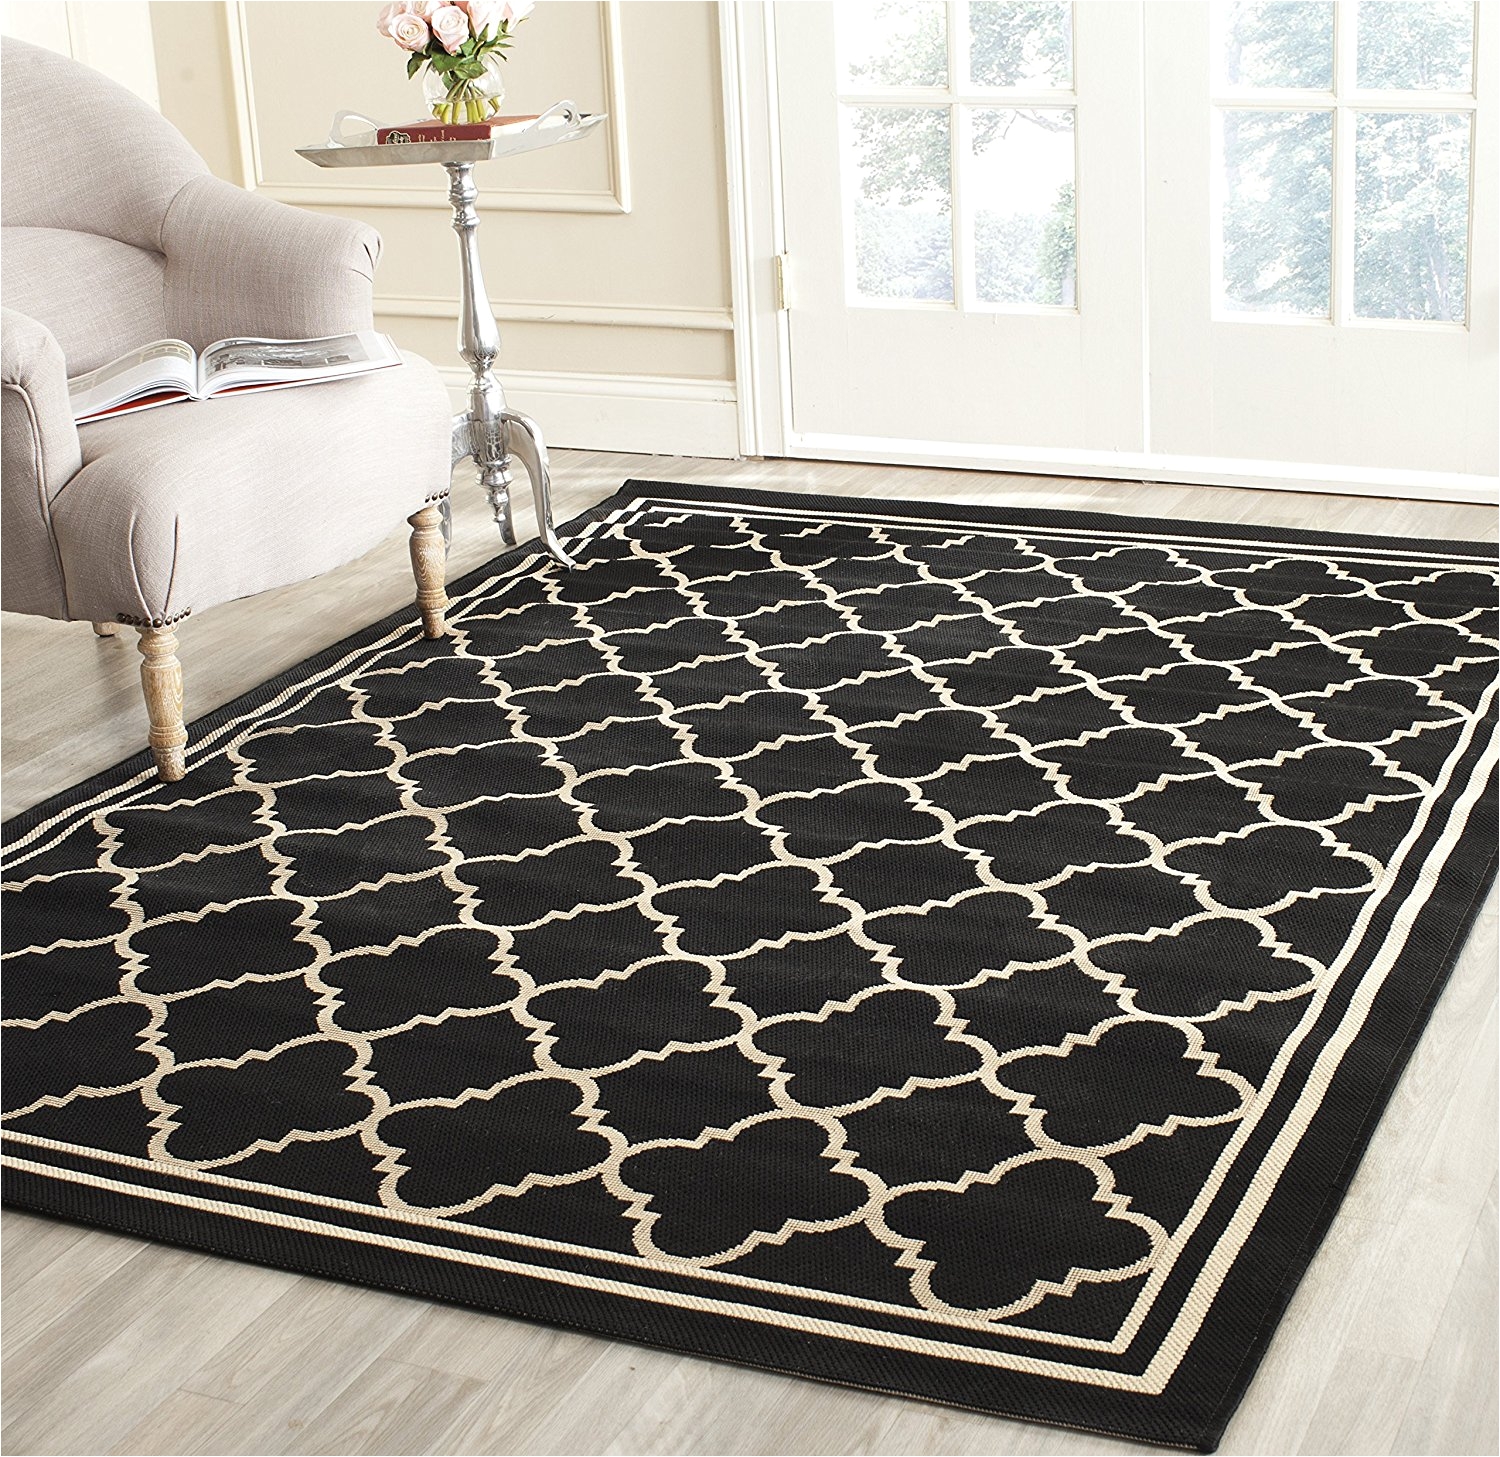 5x7 area rug home depot 5 by 8 size bedroom rugs